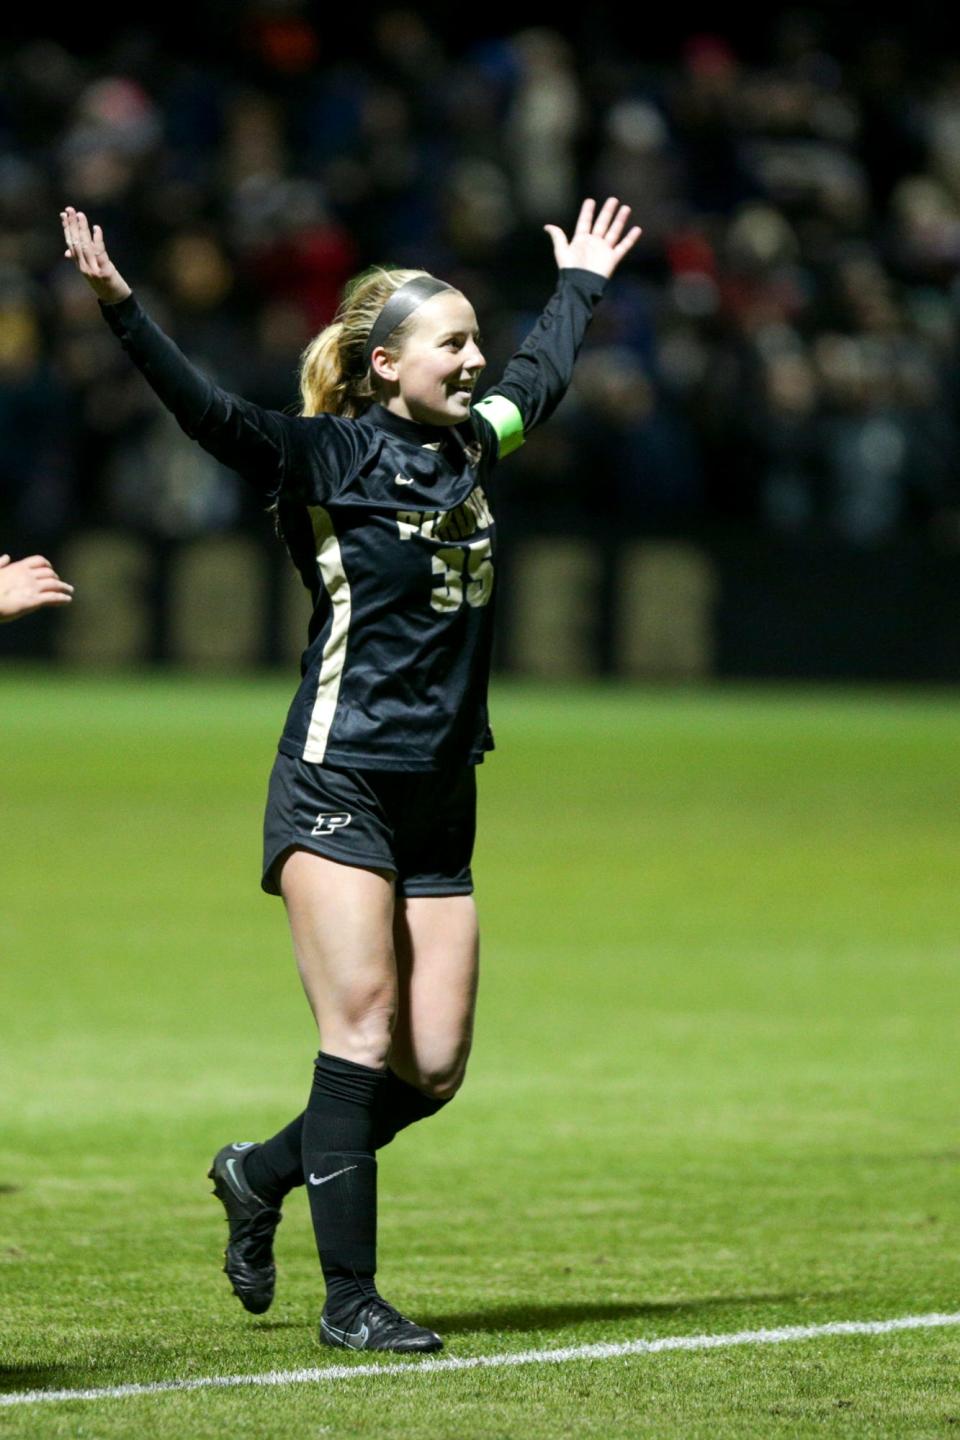 Purdue forward Sarah Griffith (35) celebrates a goal to defeat Loyola, 1-0, in overtime to win their NCAA women's soccer tournament first round game, Saturday, Nov. 13, 2021 at Folk Field in West Lafayette.